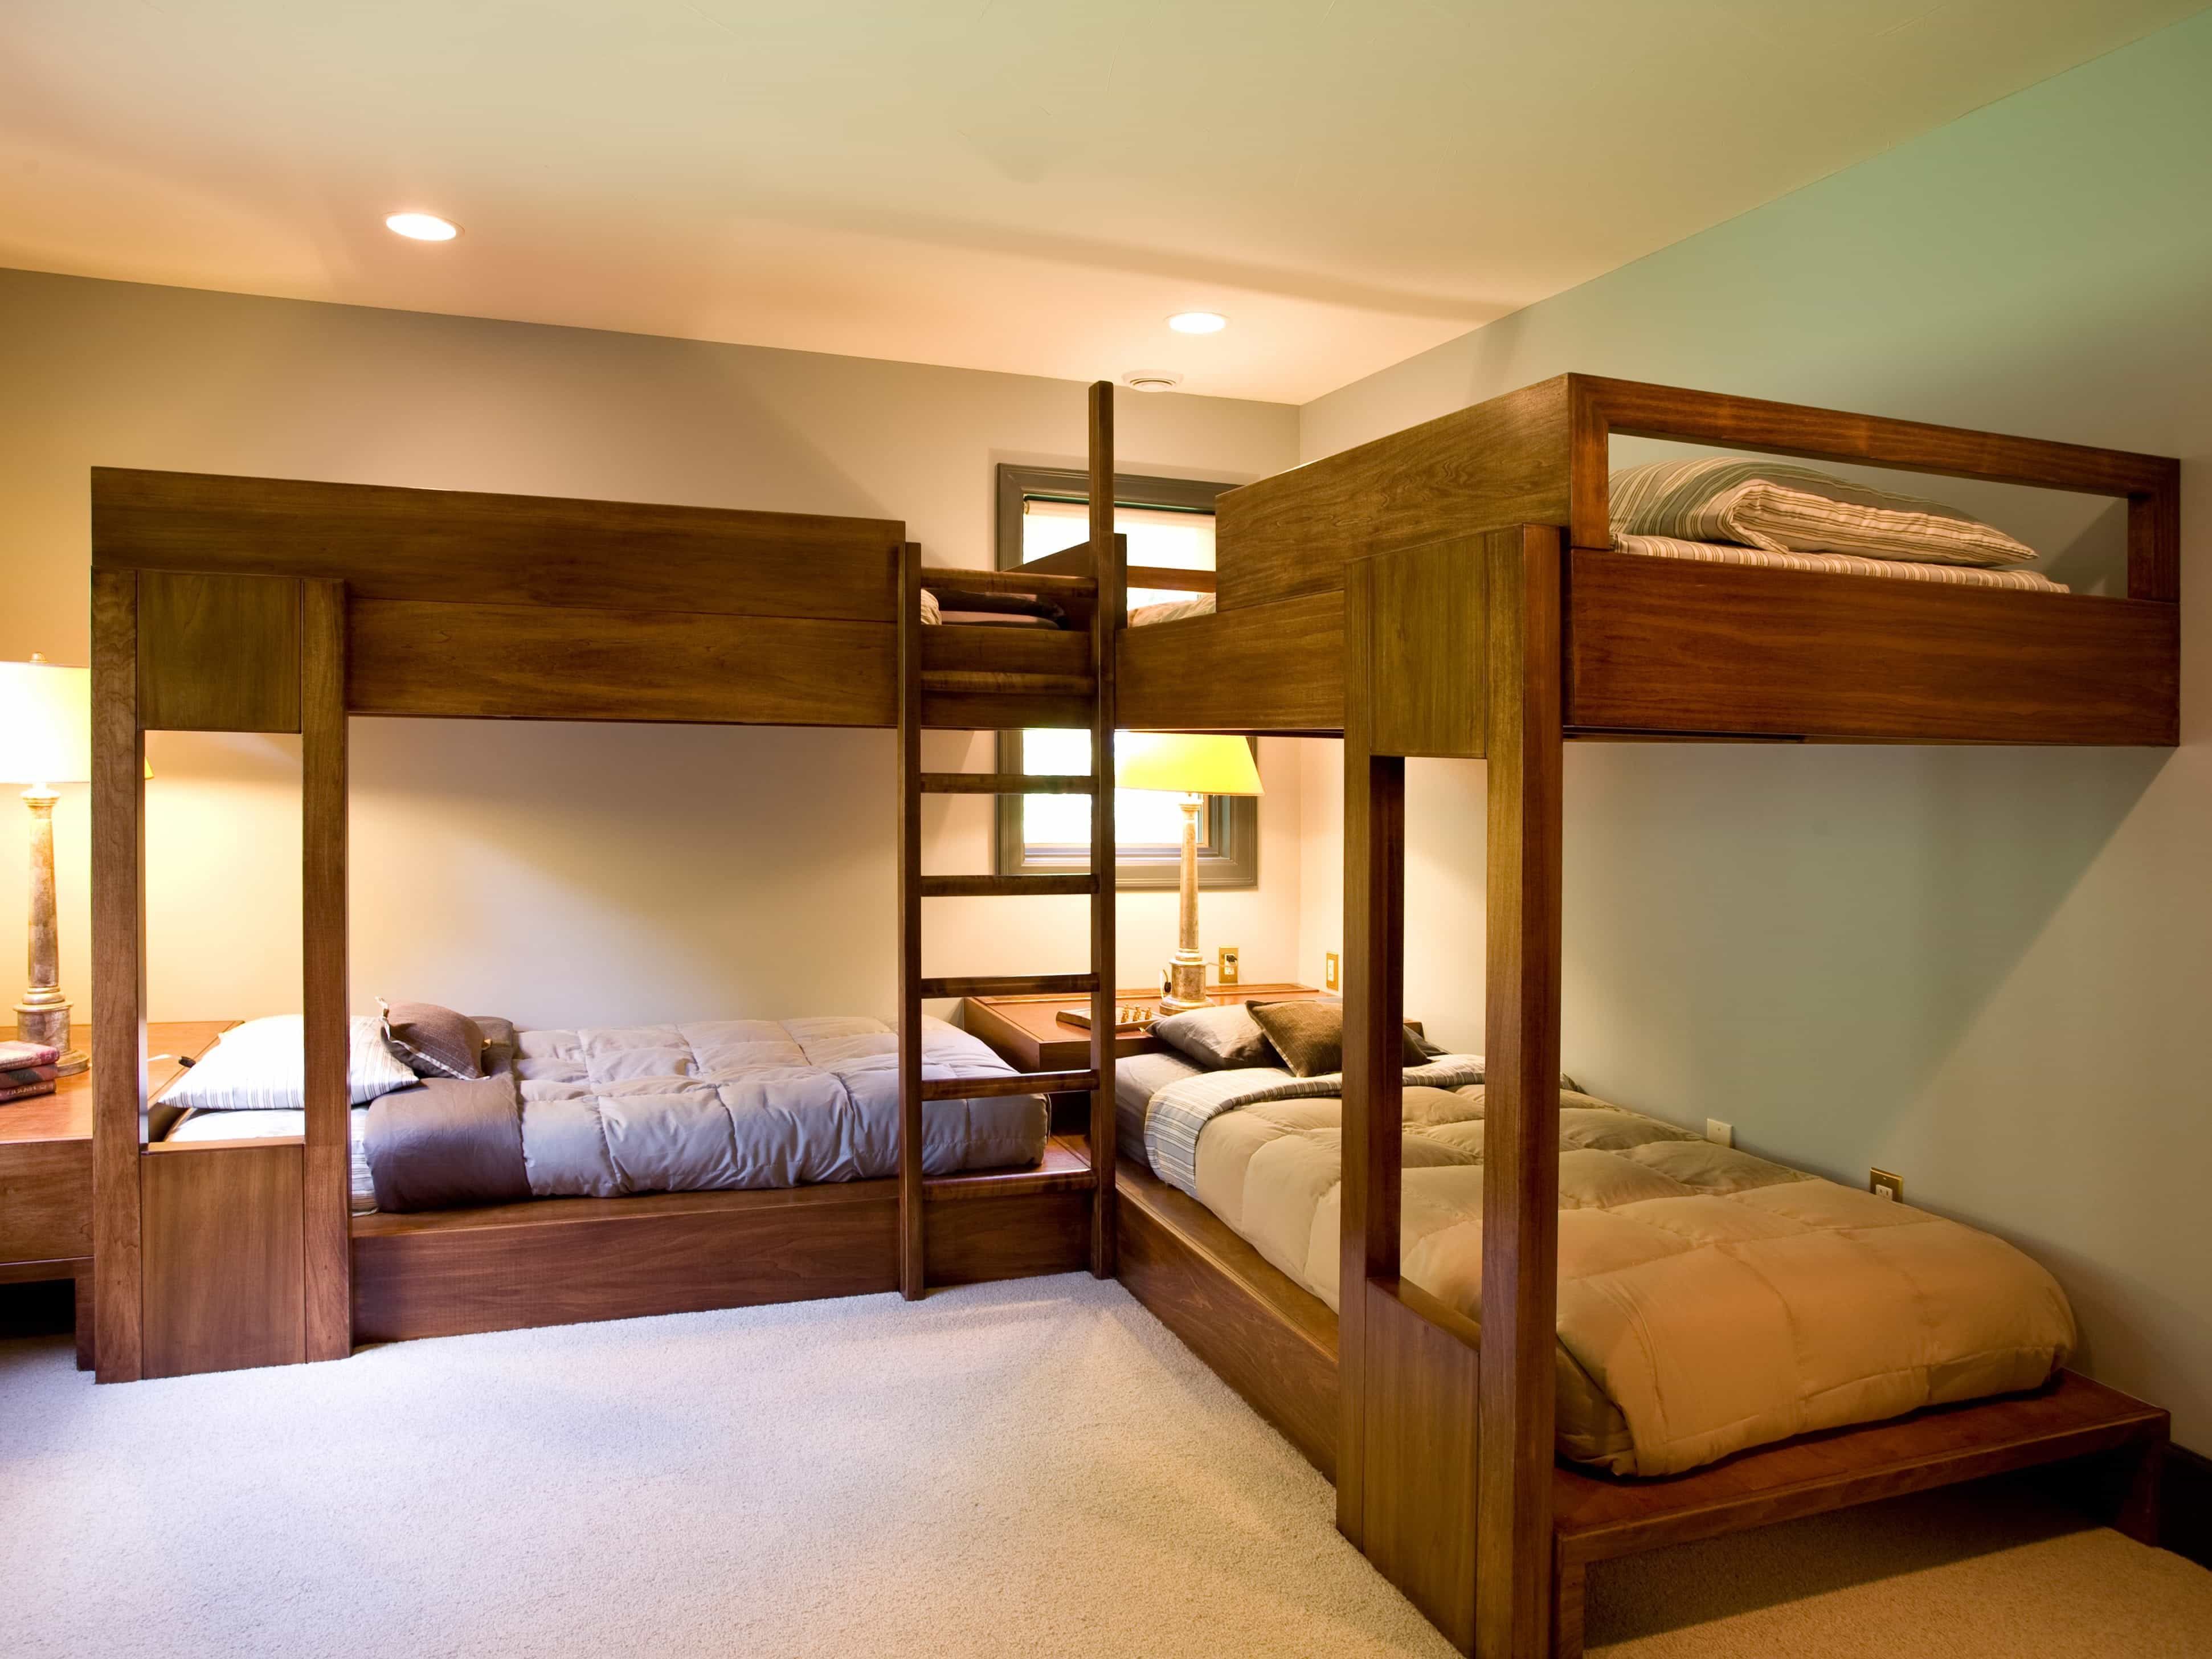 Rustic Childrens Bedroom With Minimalistic Wooden Beds Accented With Neutral Tones And Warm Lighting (View 1 of 27)